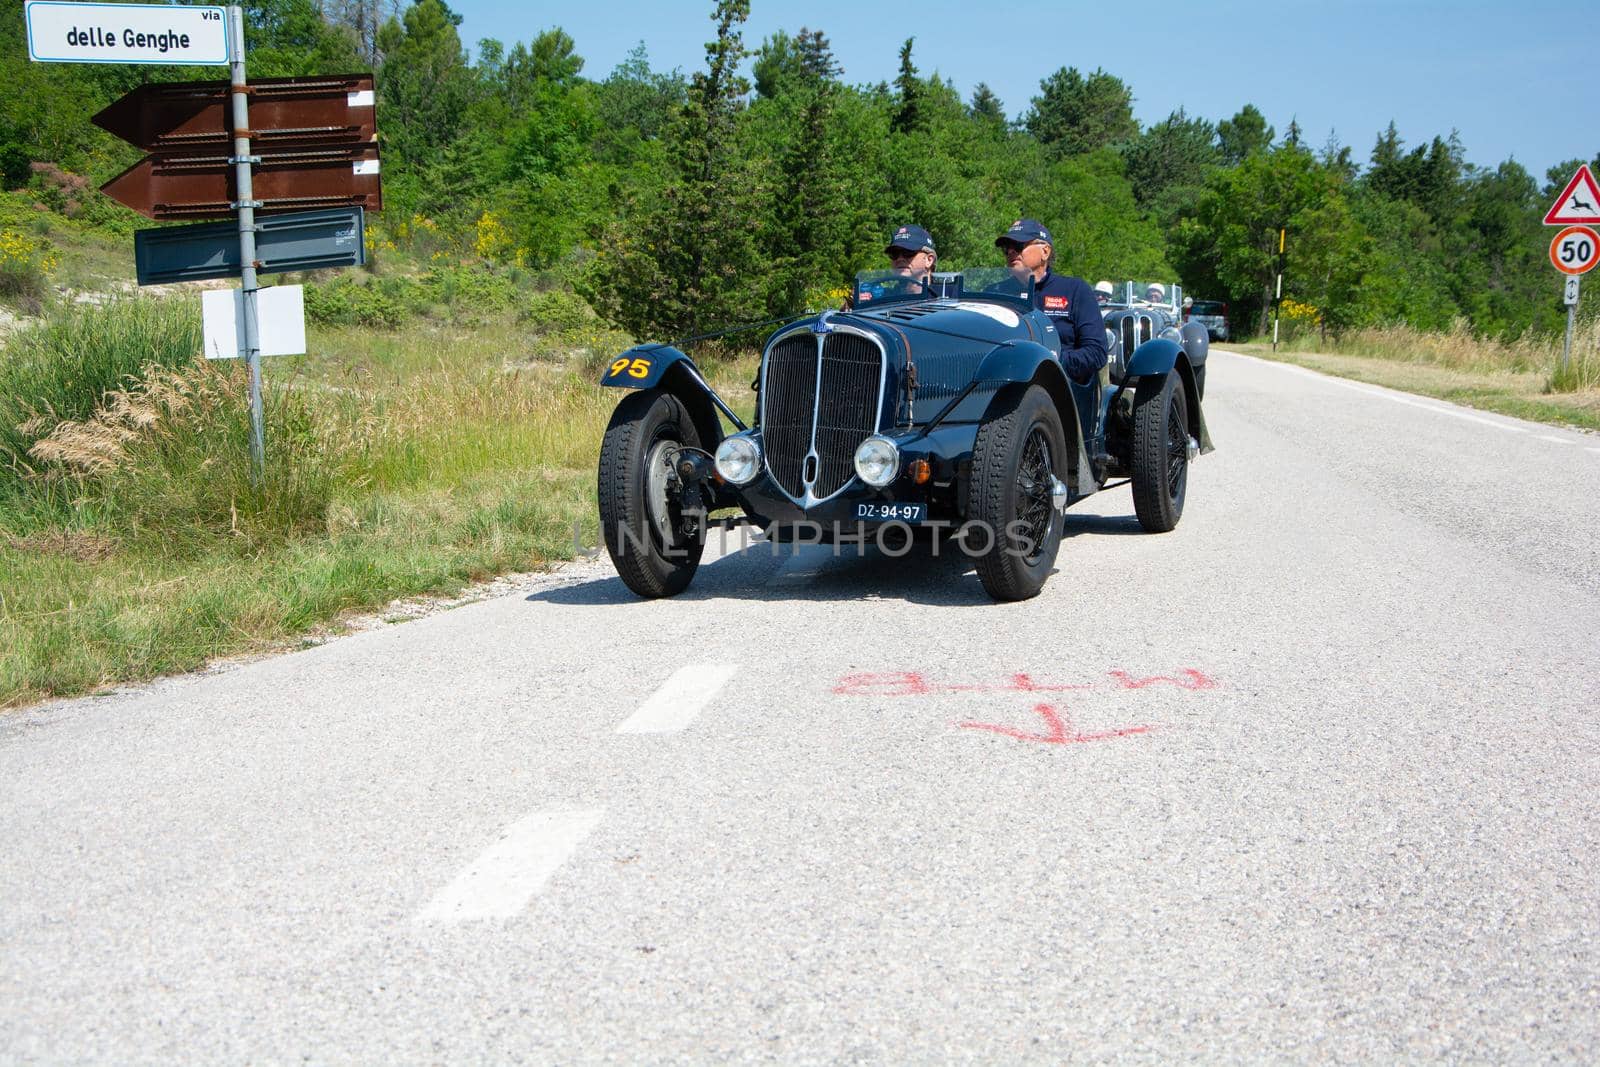 DELAHAYE 135 CS 1936 on an old racing car in rally Mille Miglia 2022 the famous italian historical race (1927-1957 by massimocampanari